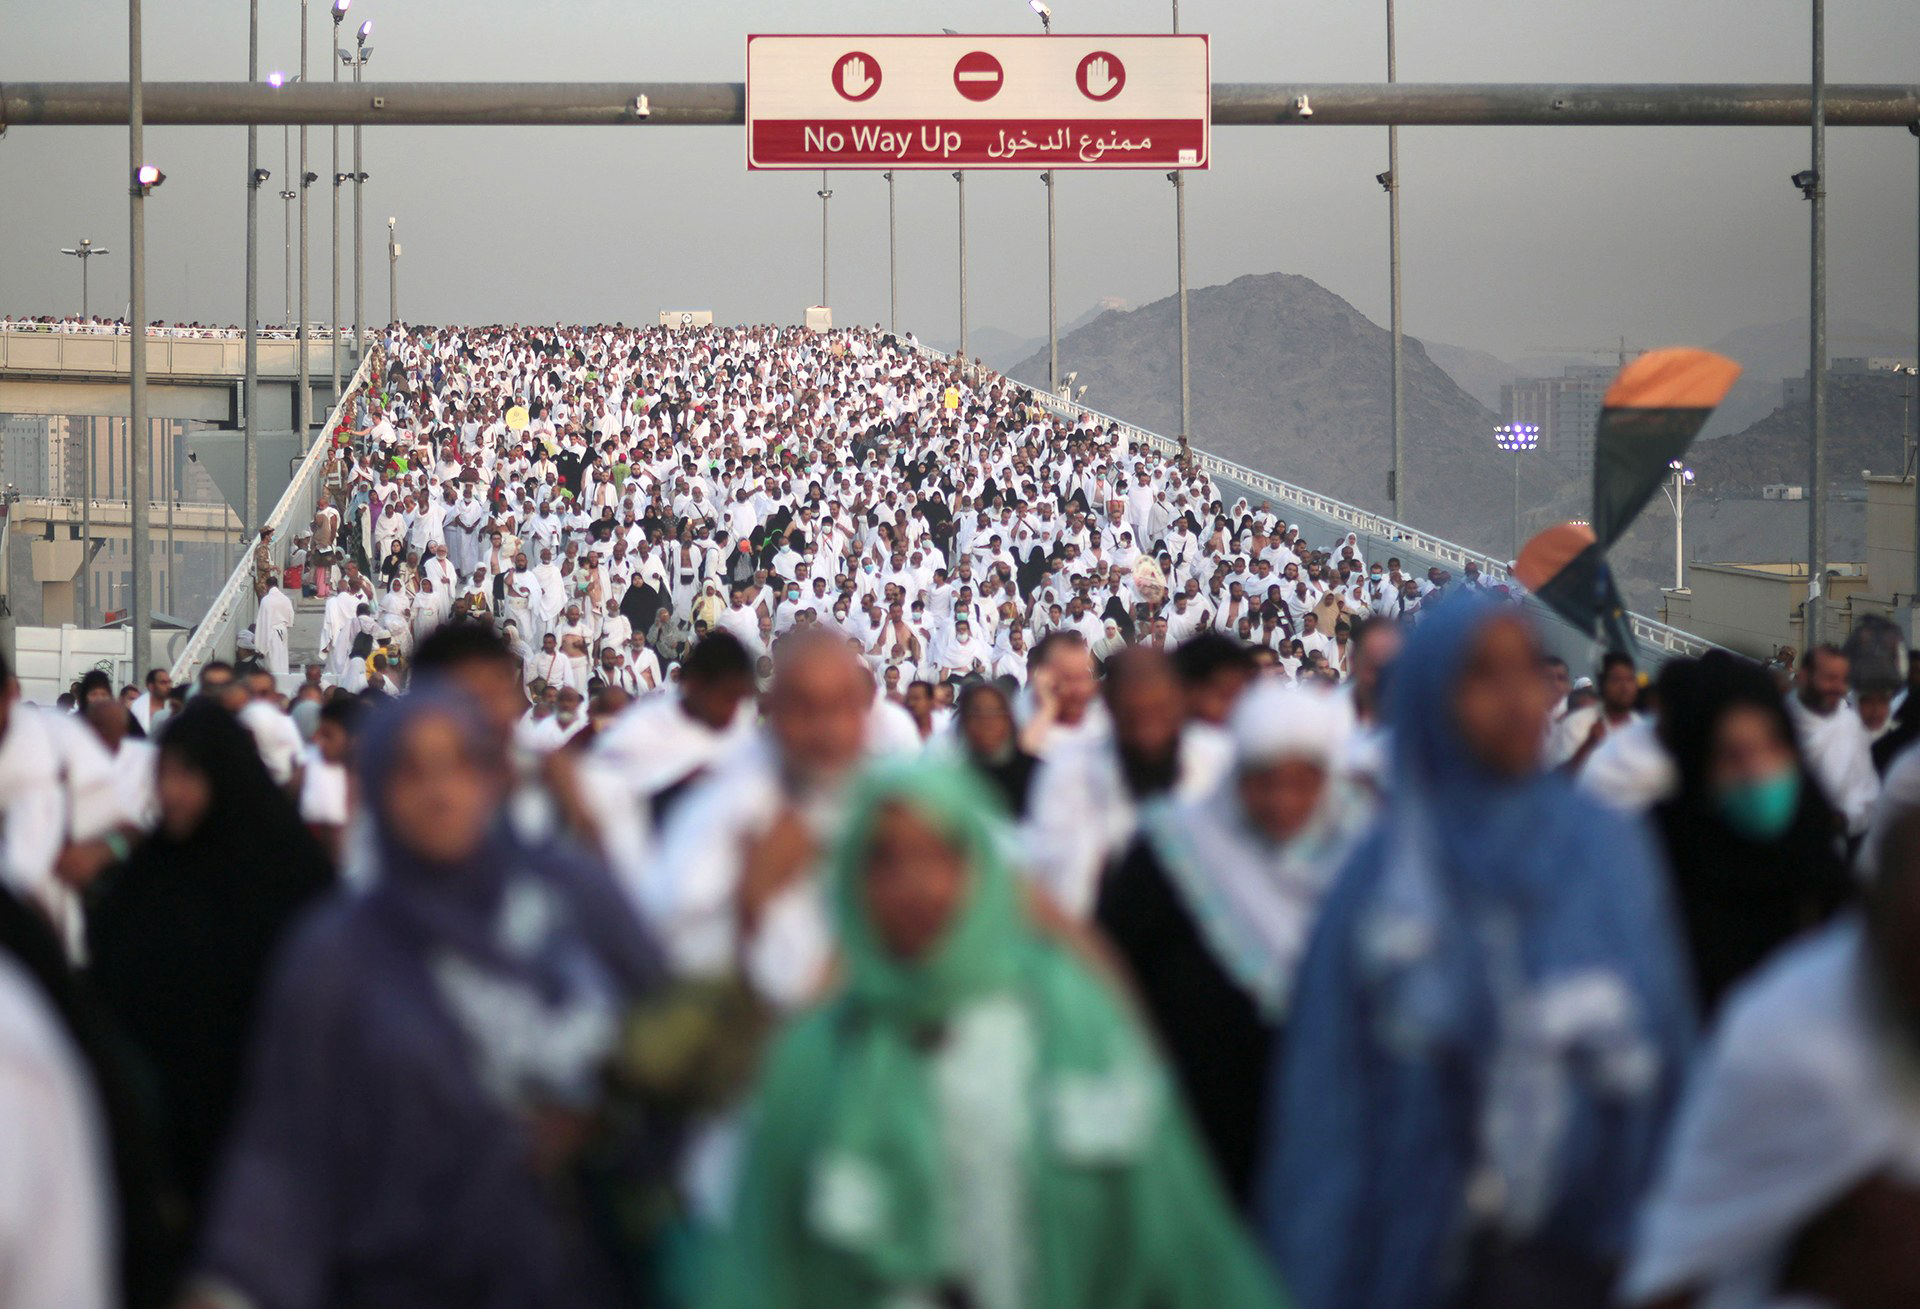 Mina stampede; At least 1,100 people are killed and another 934 wounded after a stampede during the Hajj in Saudi Arabia.